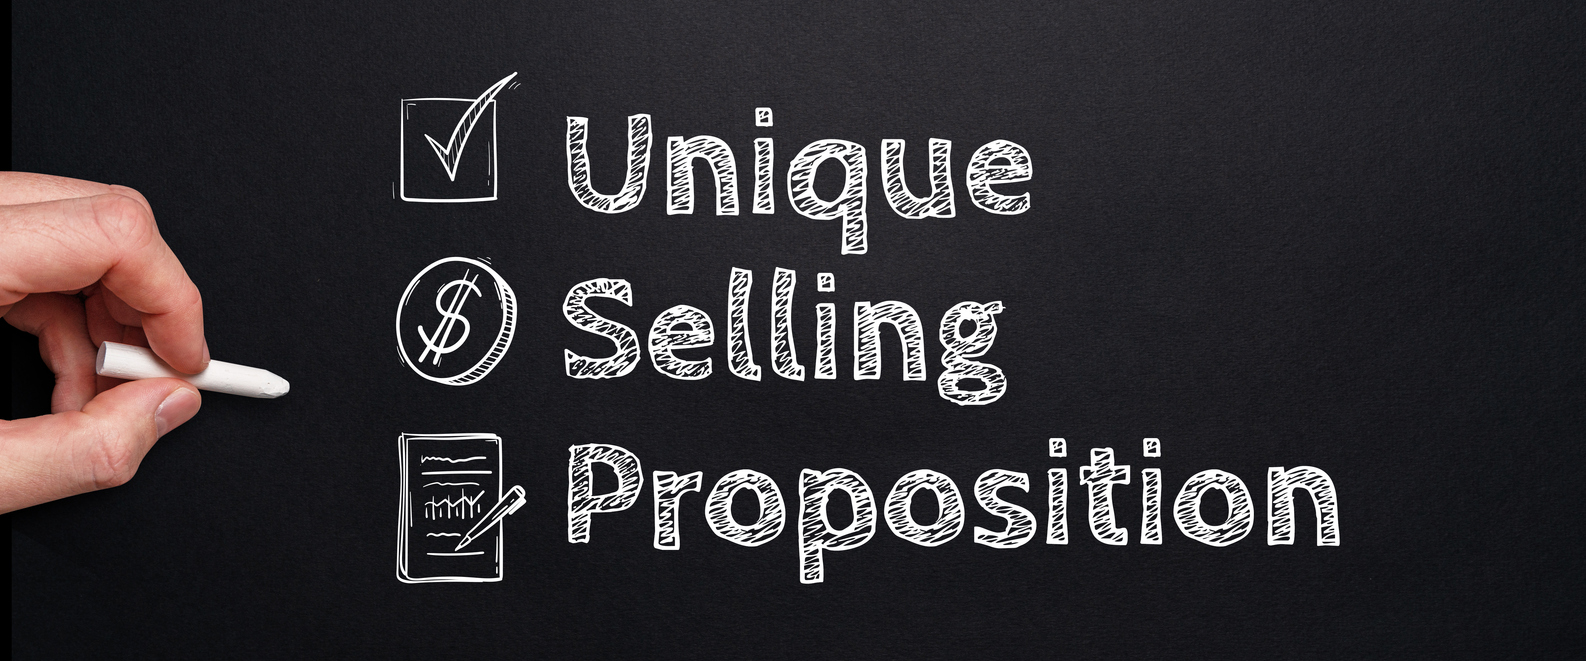 An illustration of a unique selling proposition.